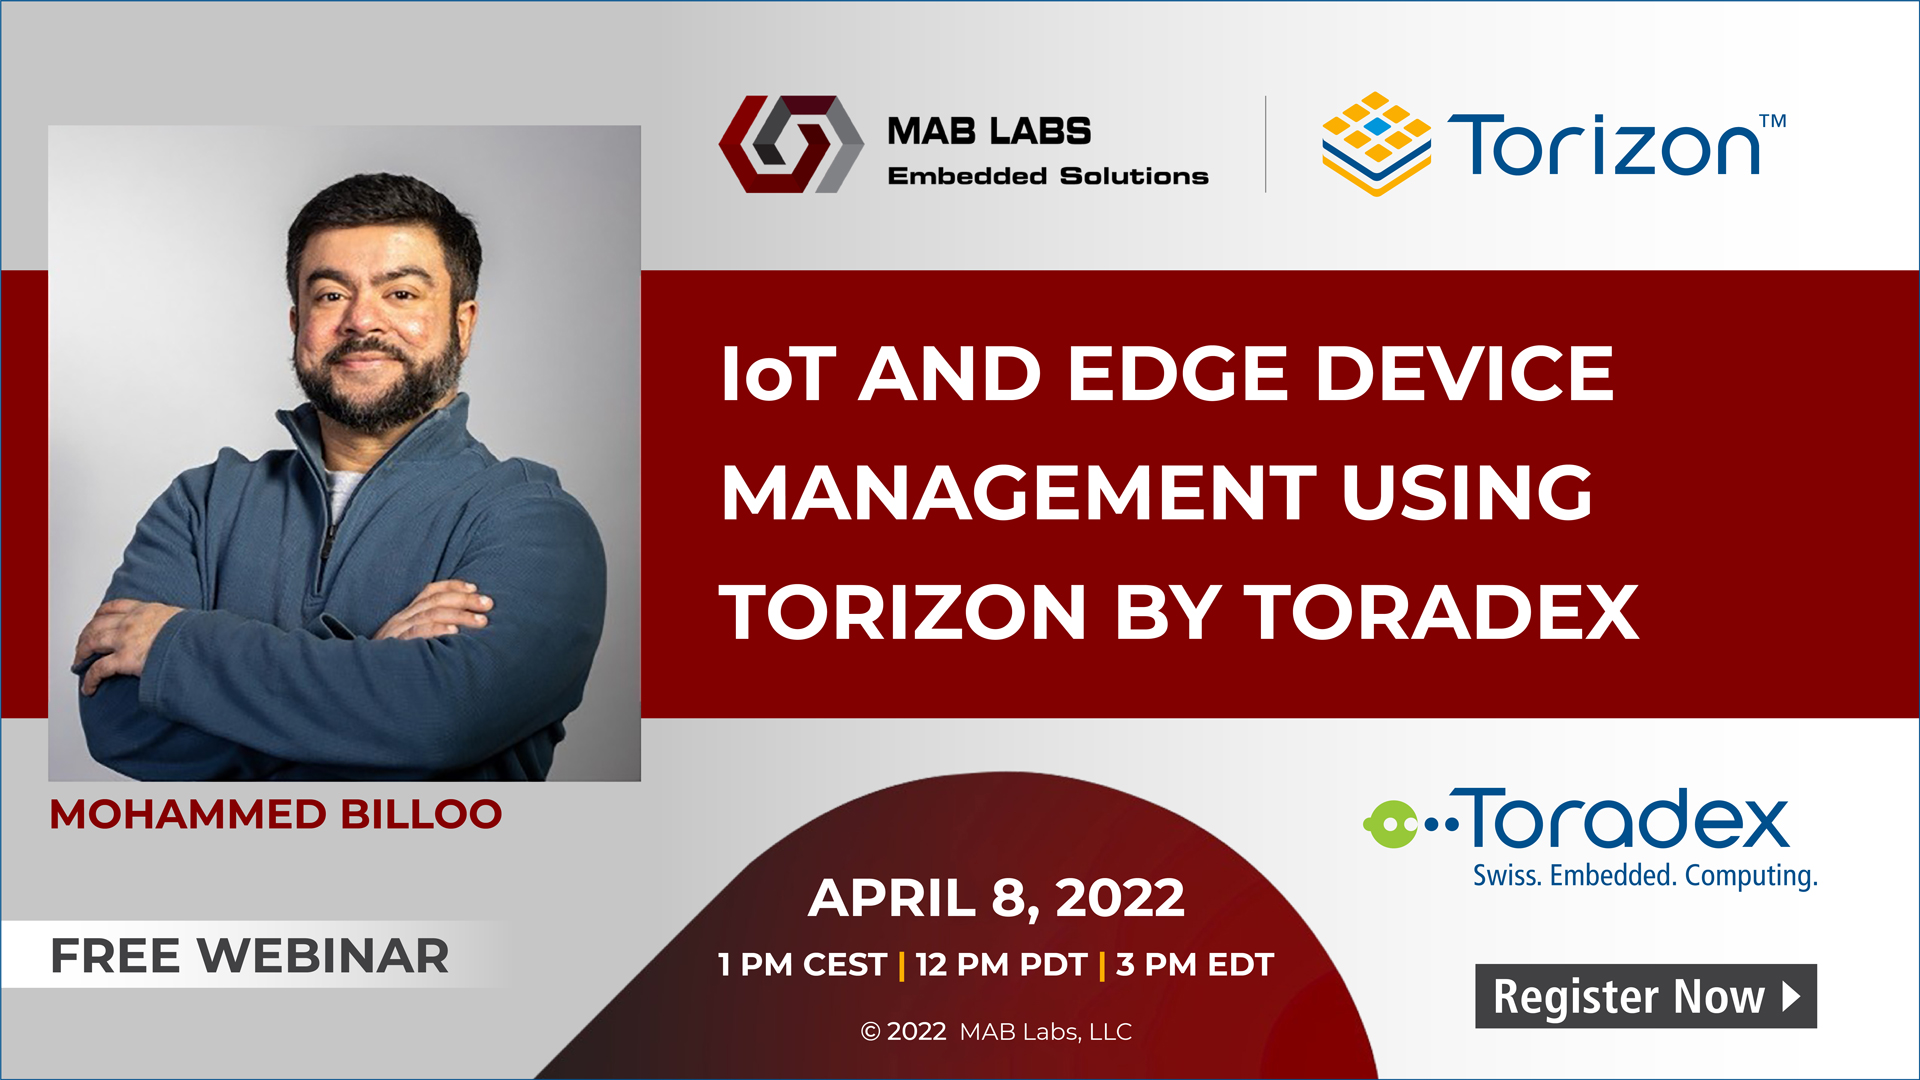 Webinar: IoT and Edge Device Management Using Torizon by Toradex, Online Event